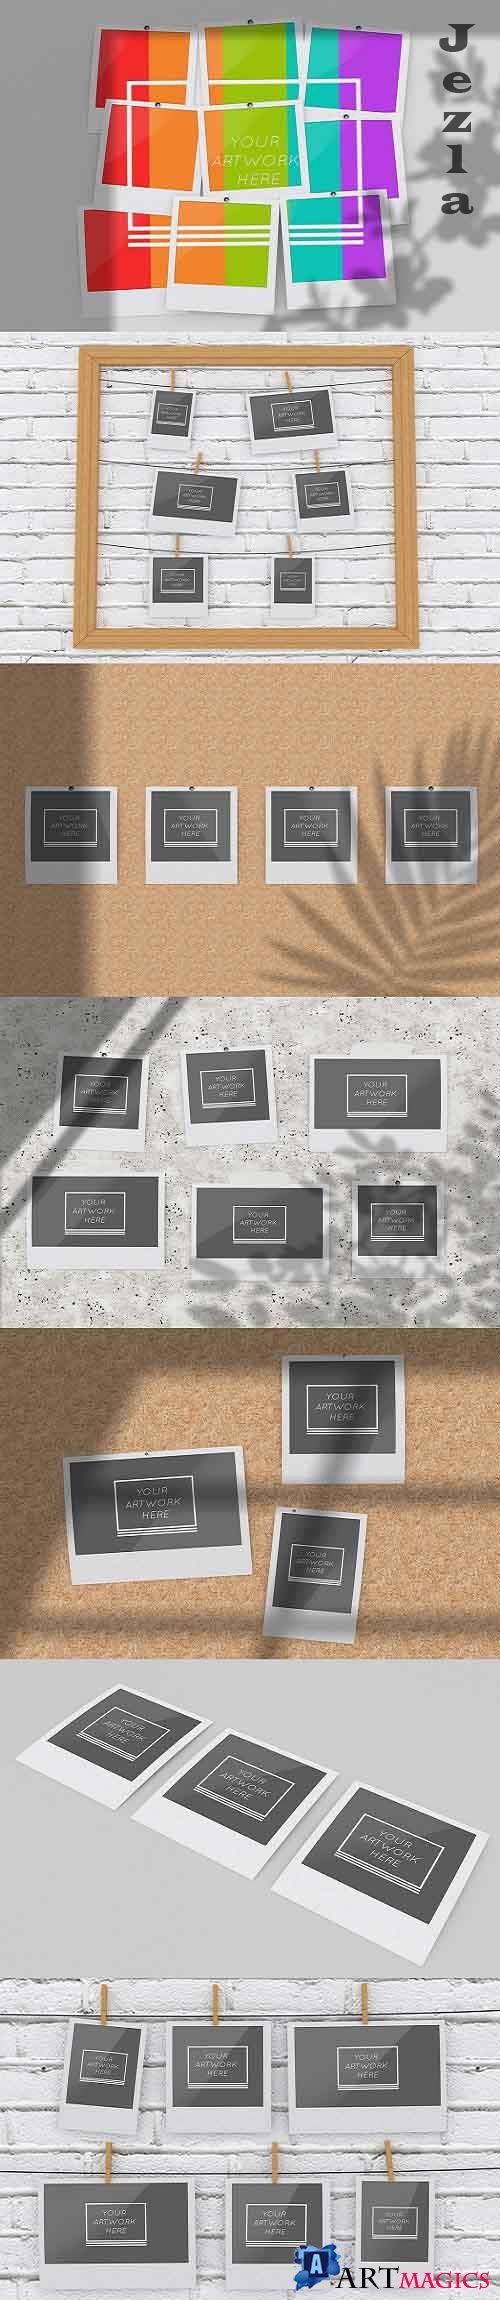 Instant Photos Collage Mockup in Wooden Frame, on Plywood Wall